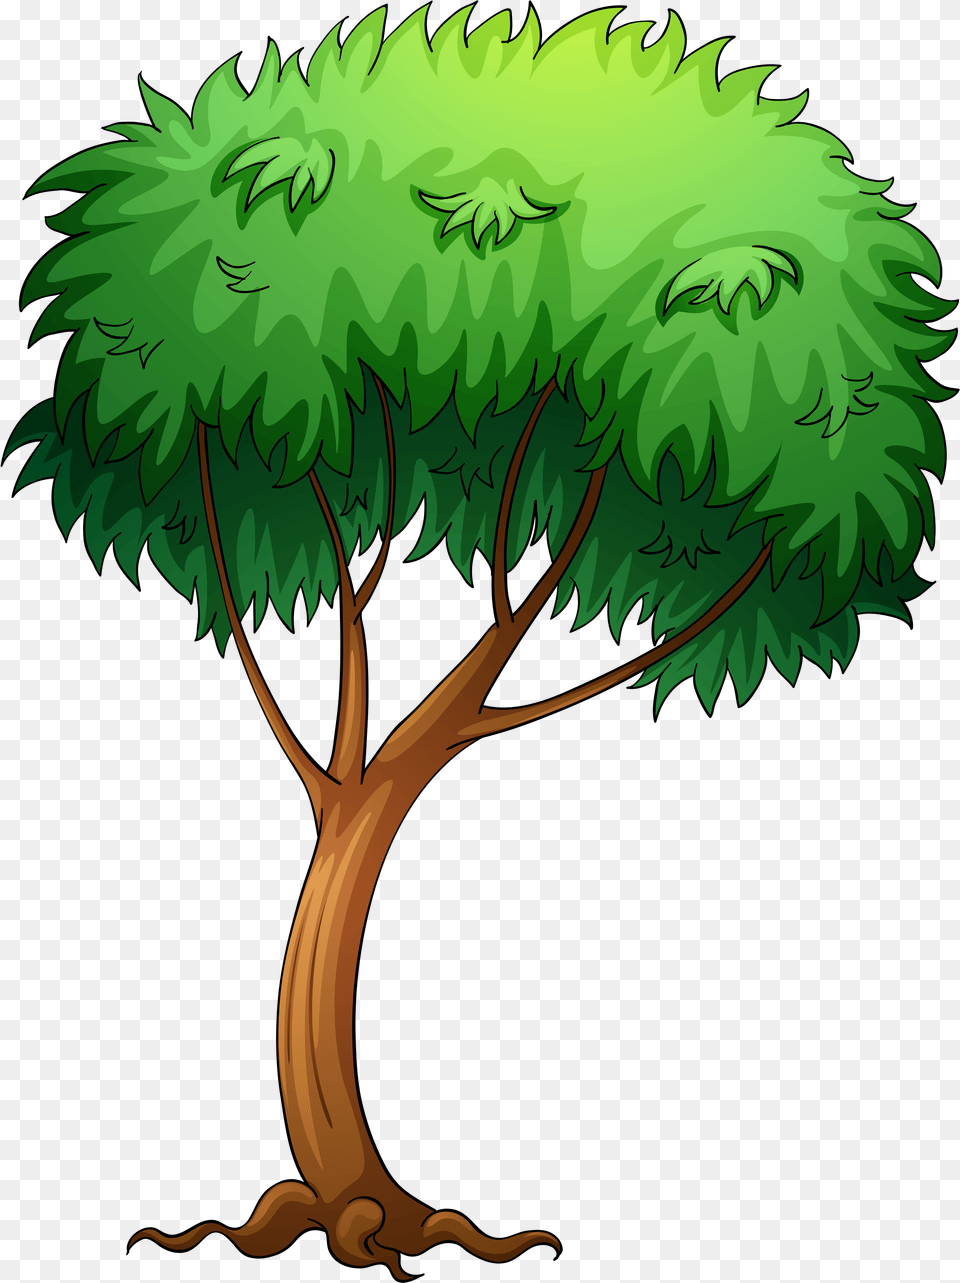 Pictures Of Trees Image Tree With A Bird, Plant, Vegetation, Green, Conifer Free Png